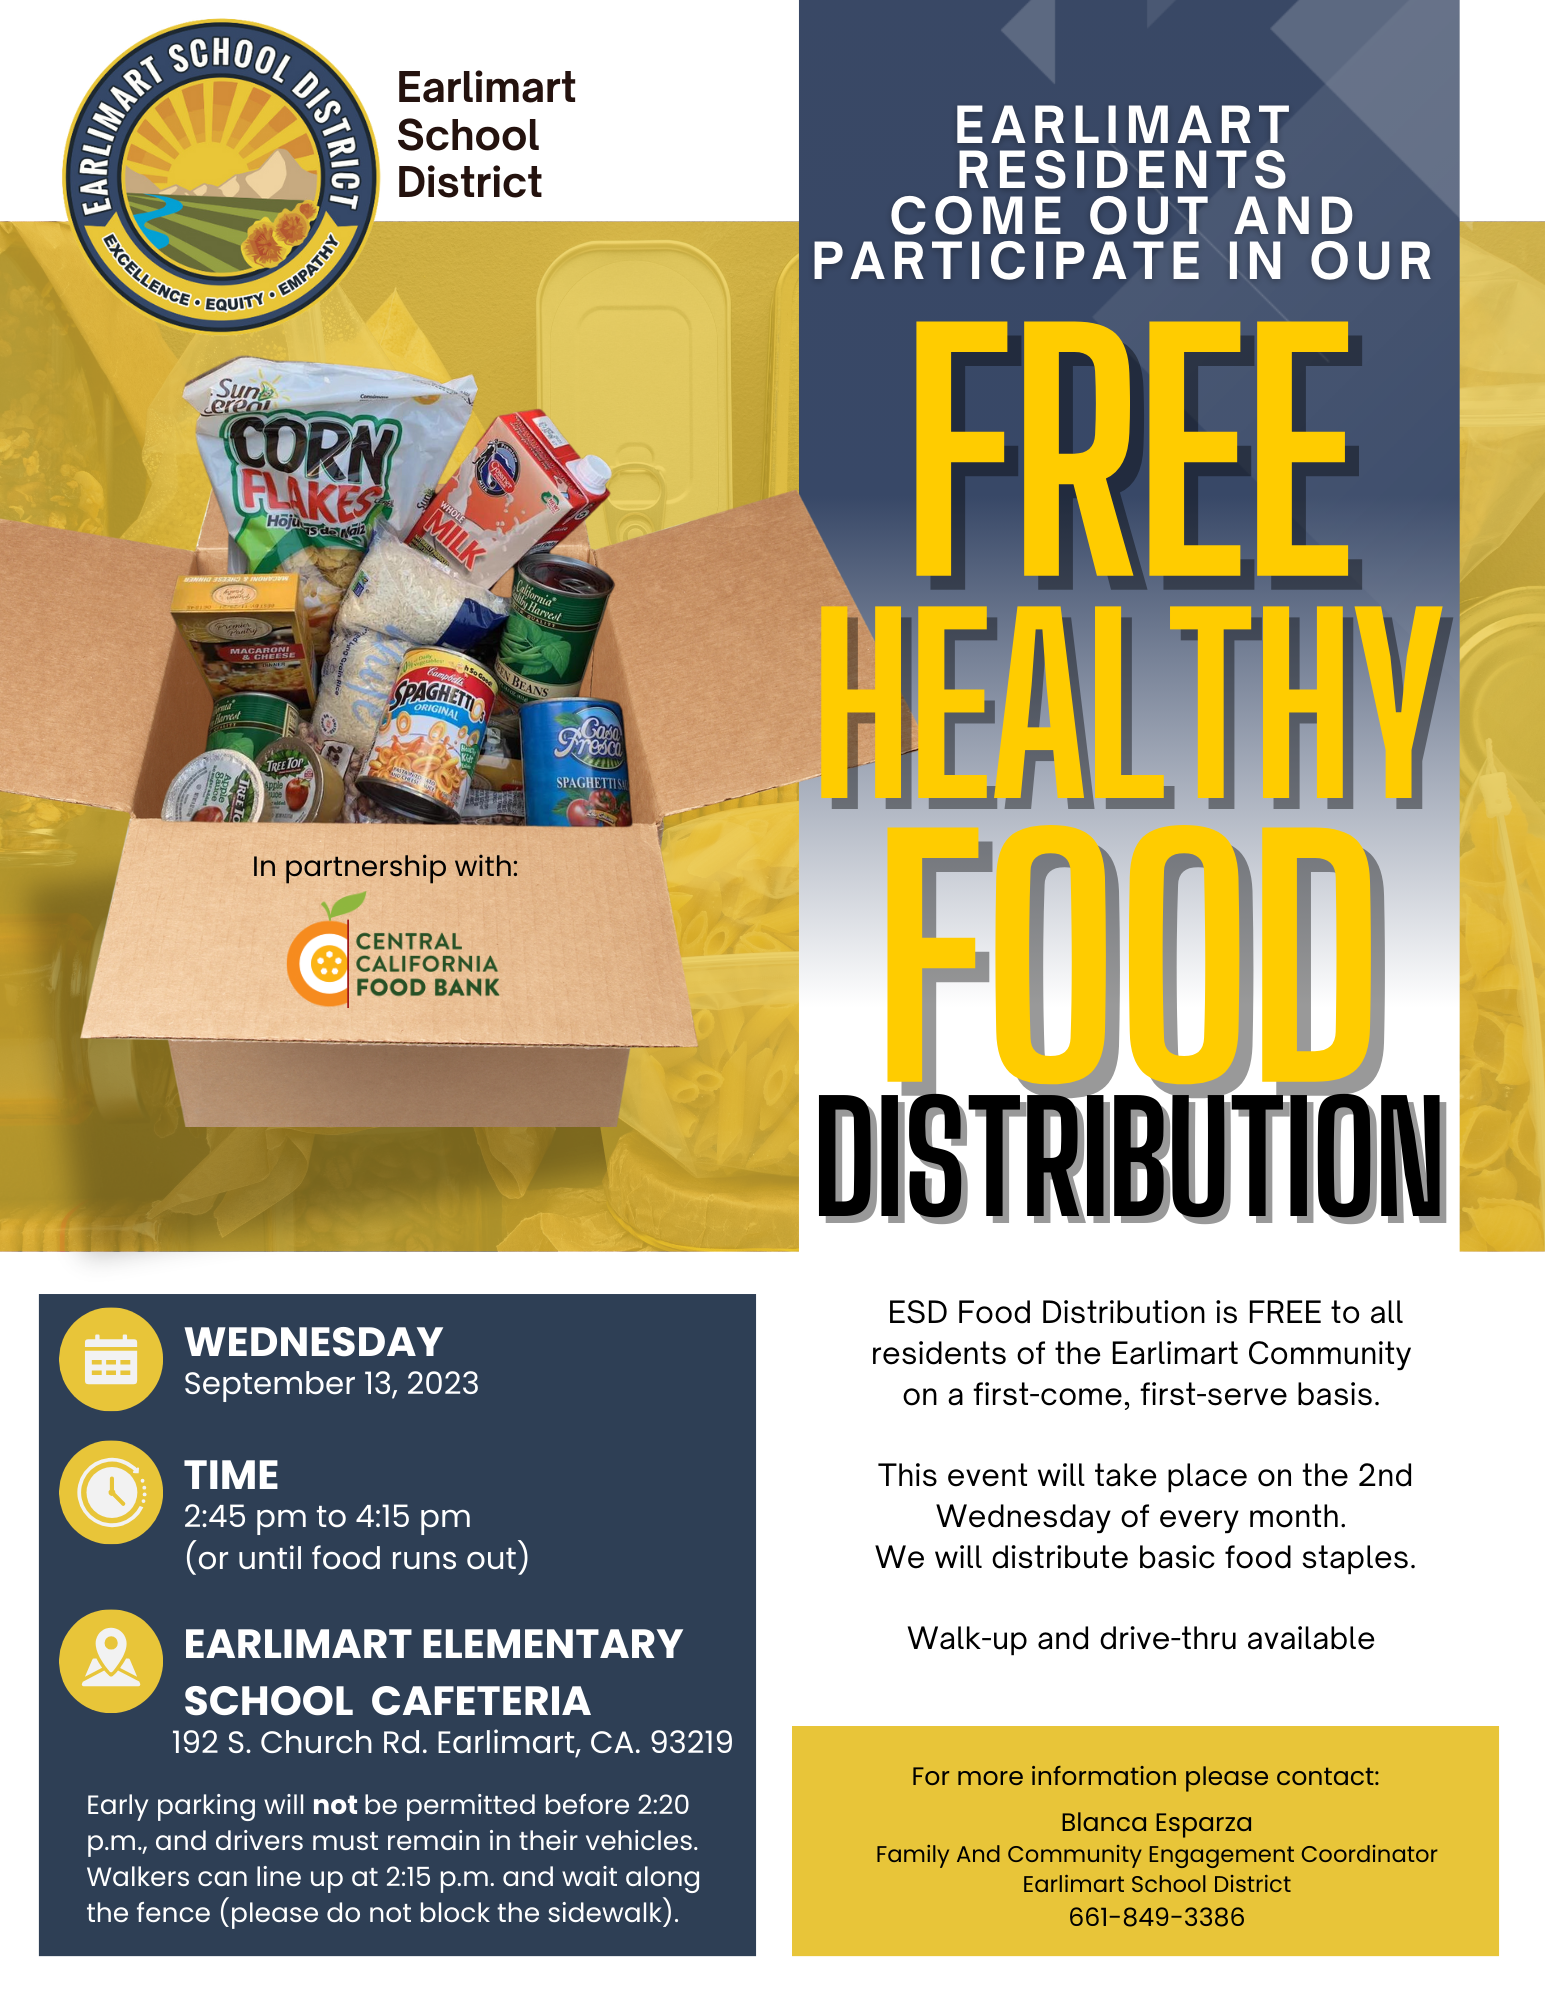 ESD logo, Box with food staples, information on free food distribution (all information in article)